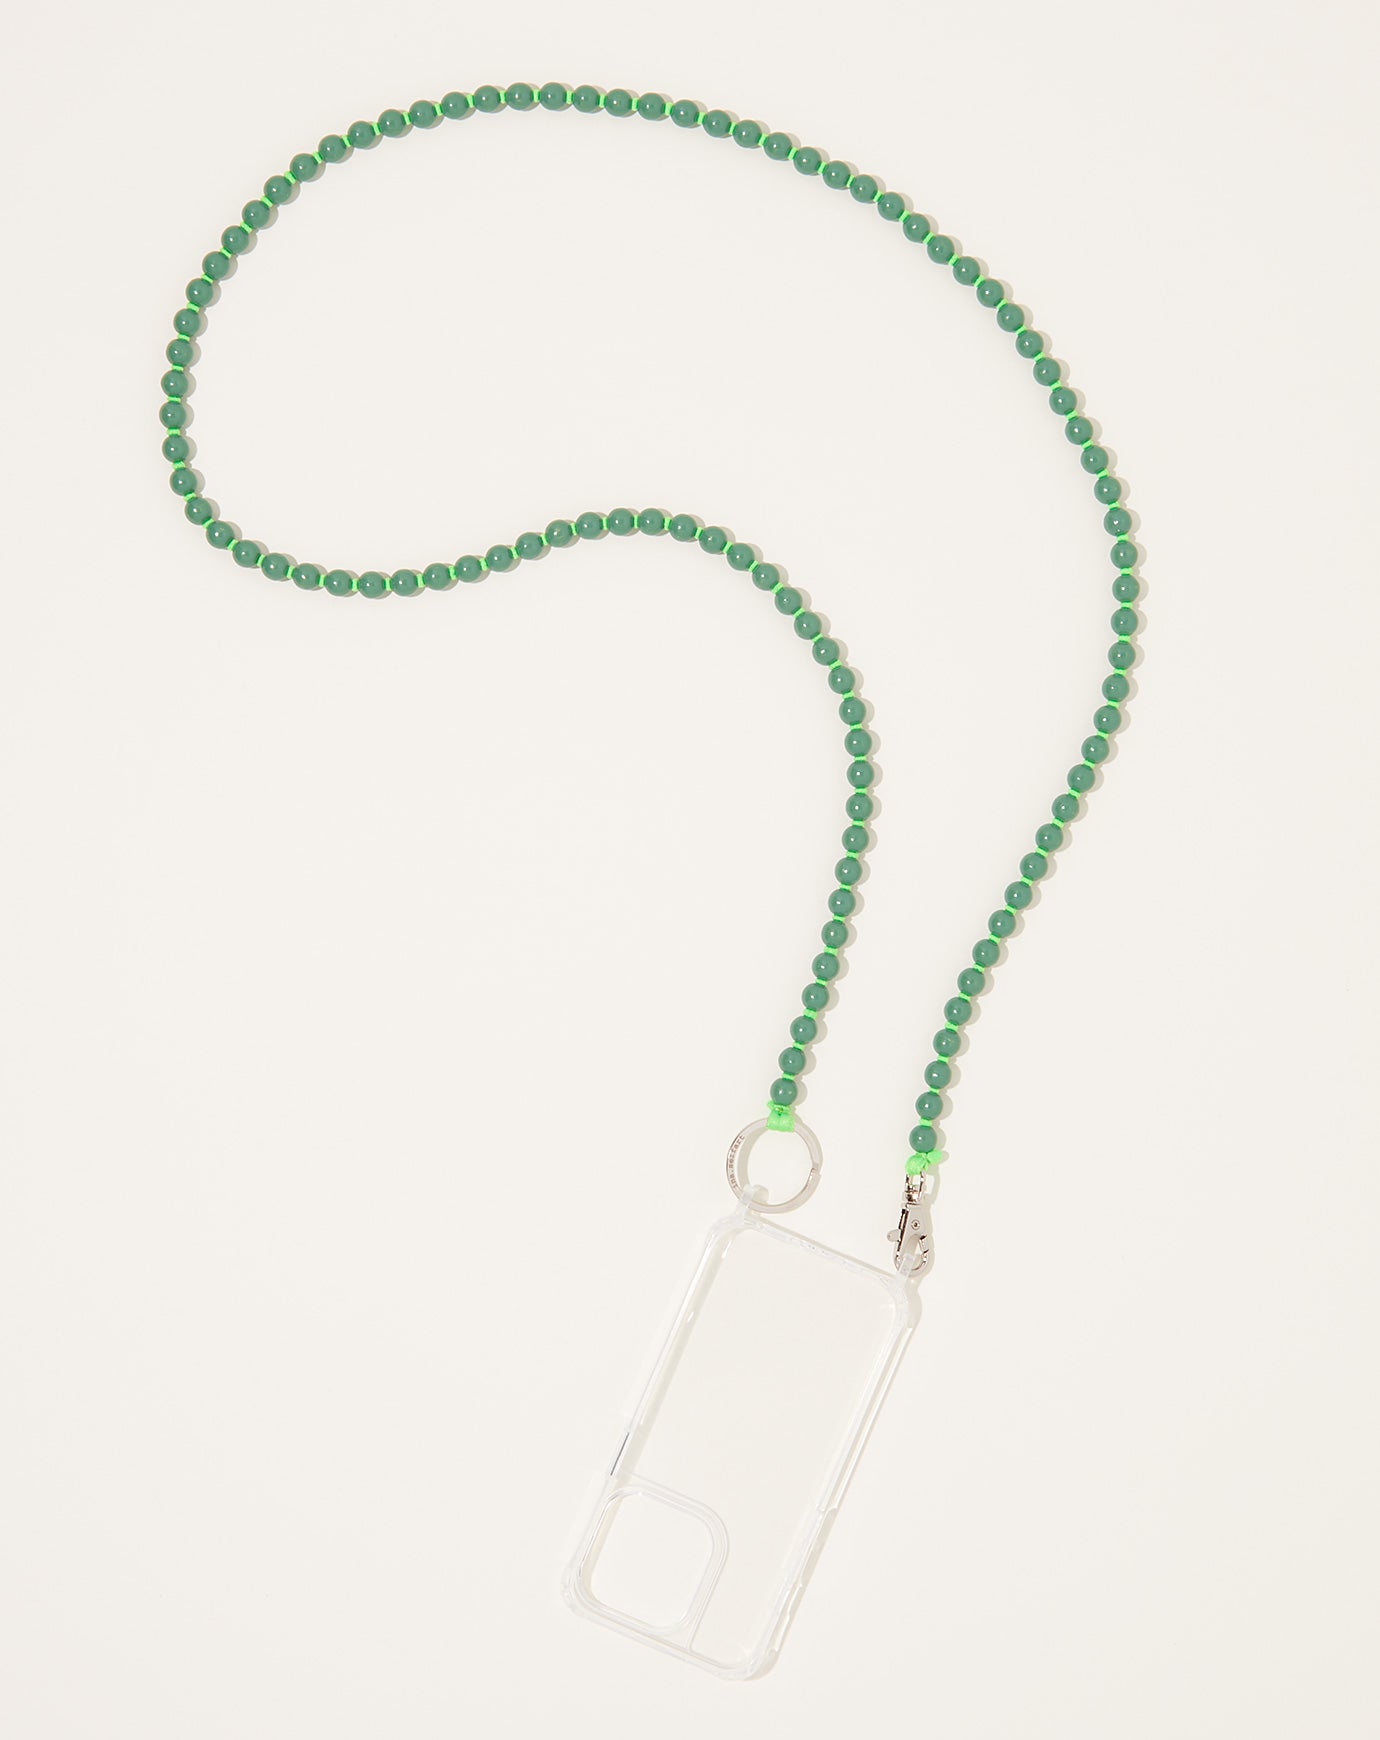 Ina Seifart Handykette iPhone Necklace in Salvia on Neon Green